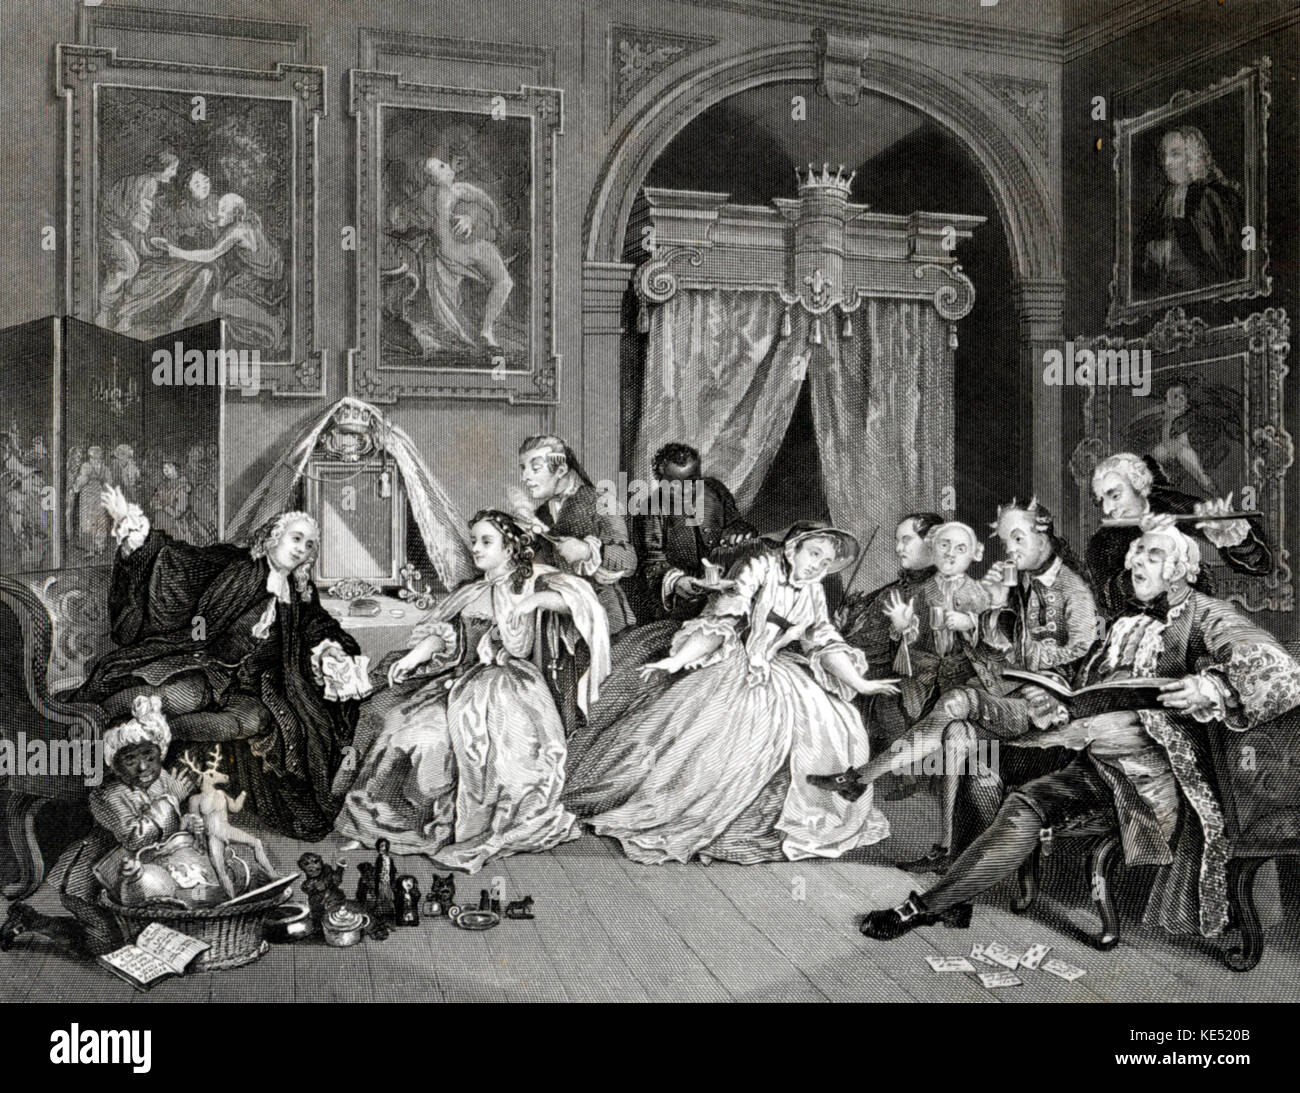 Mariage à la mode- before the ball - engraving by William Hogarth, English painter and artist. November 10, 1697 -October 26, 1764.  Printed by A H Payne. Social life in 18th century England.  Witty artistic interpretation. Influence on Richard Strauss opera Rosenkavalier.  This painting provided the plan for Marschallin von Werdenberg's levée in Rosenkavalier. Stock Photo